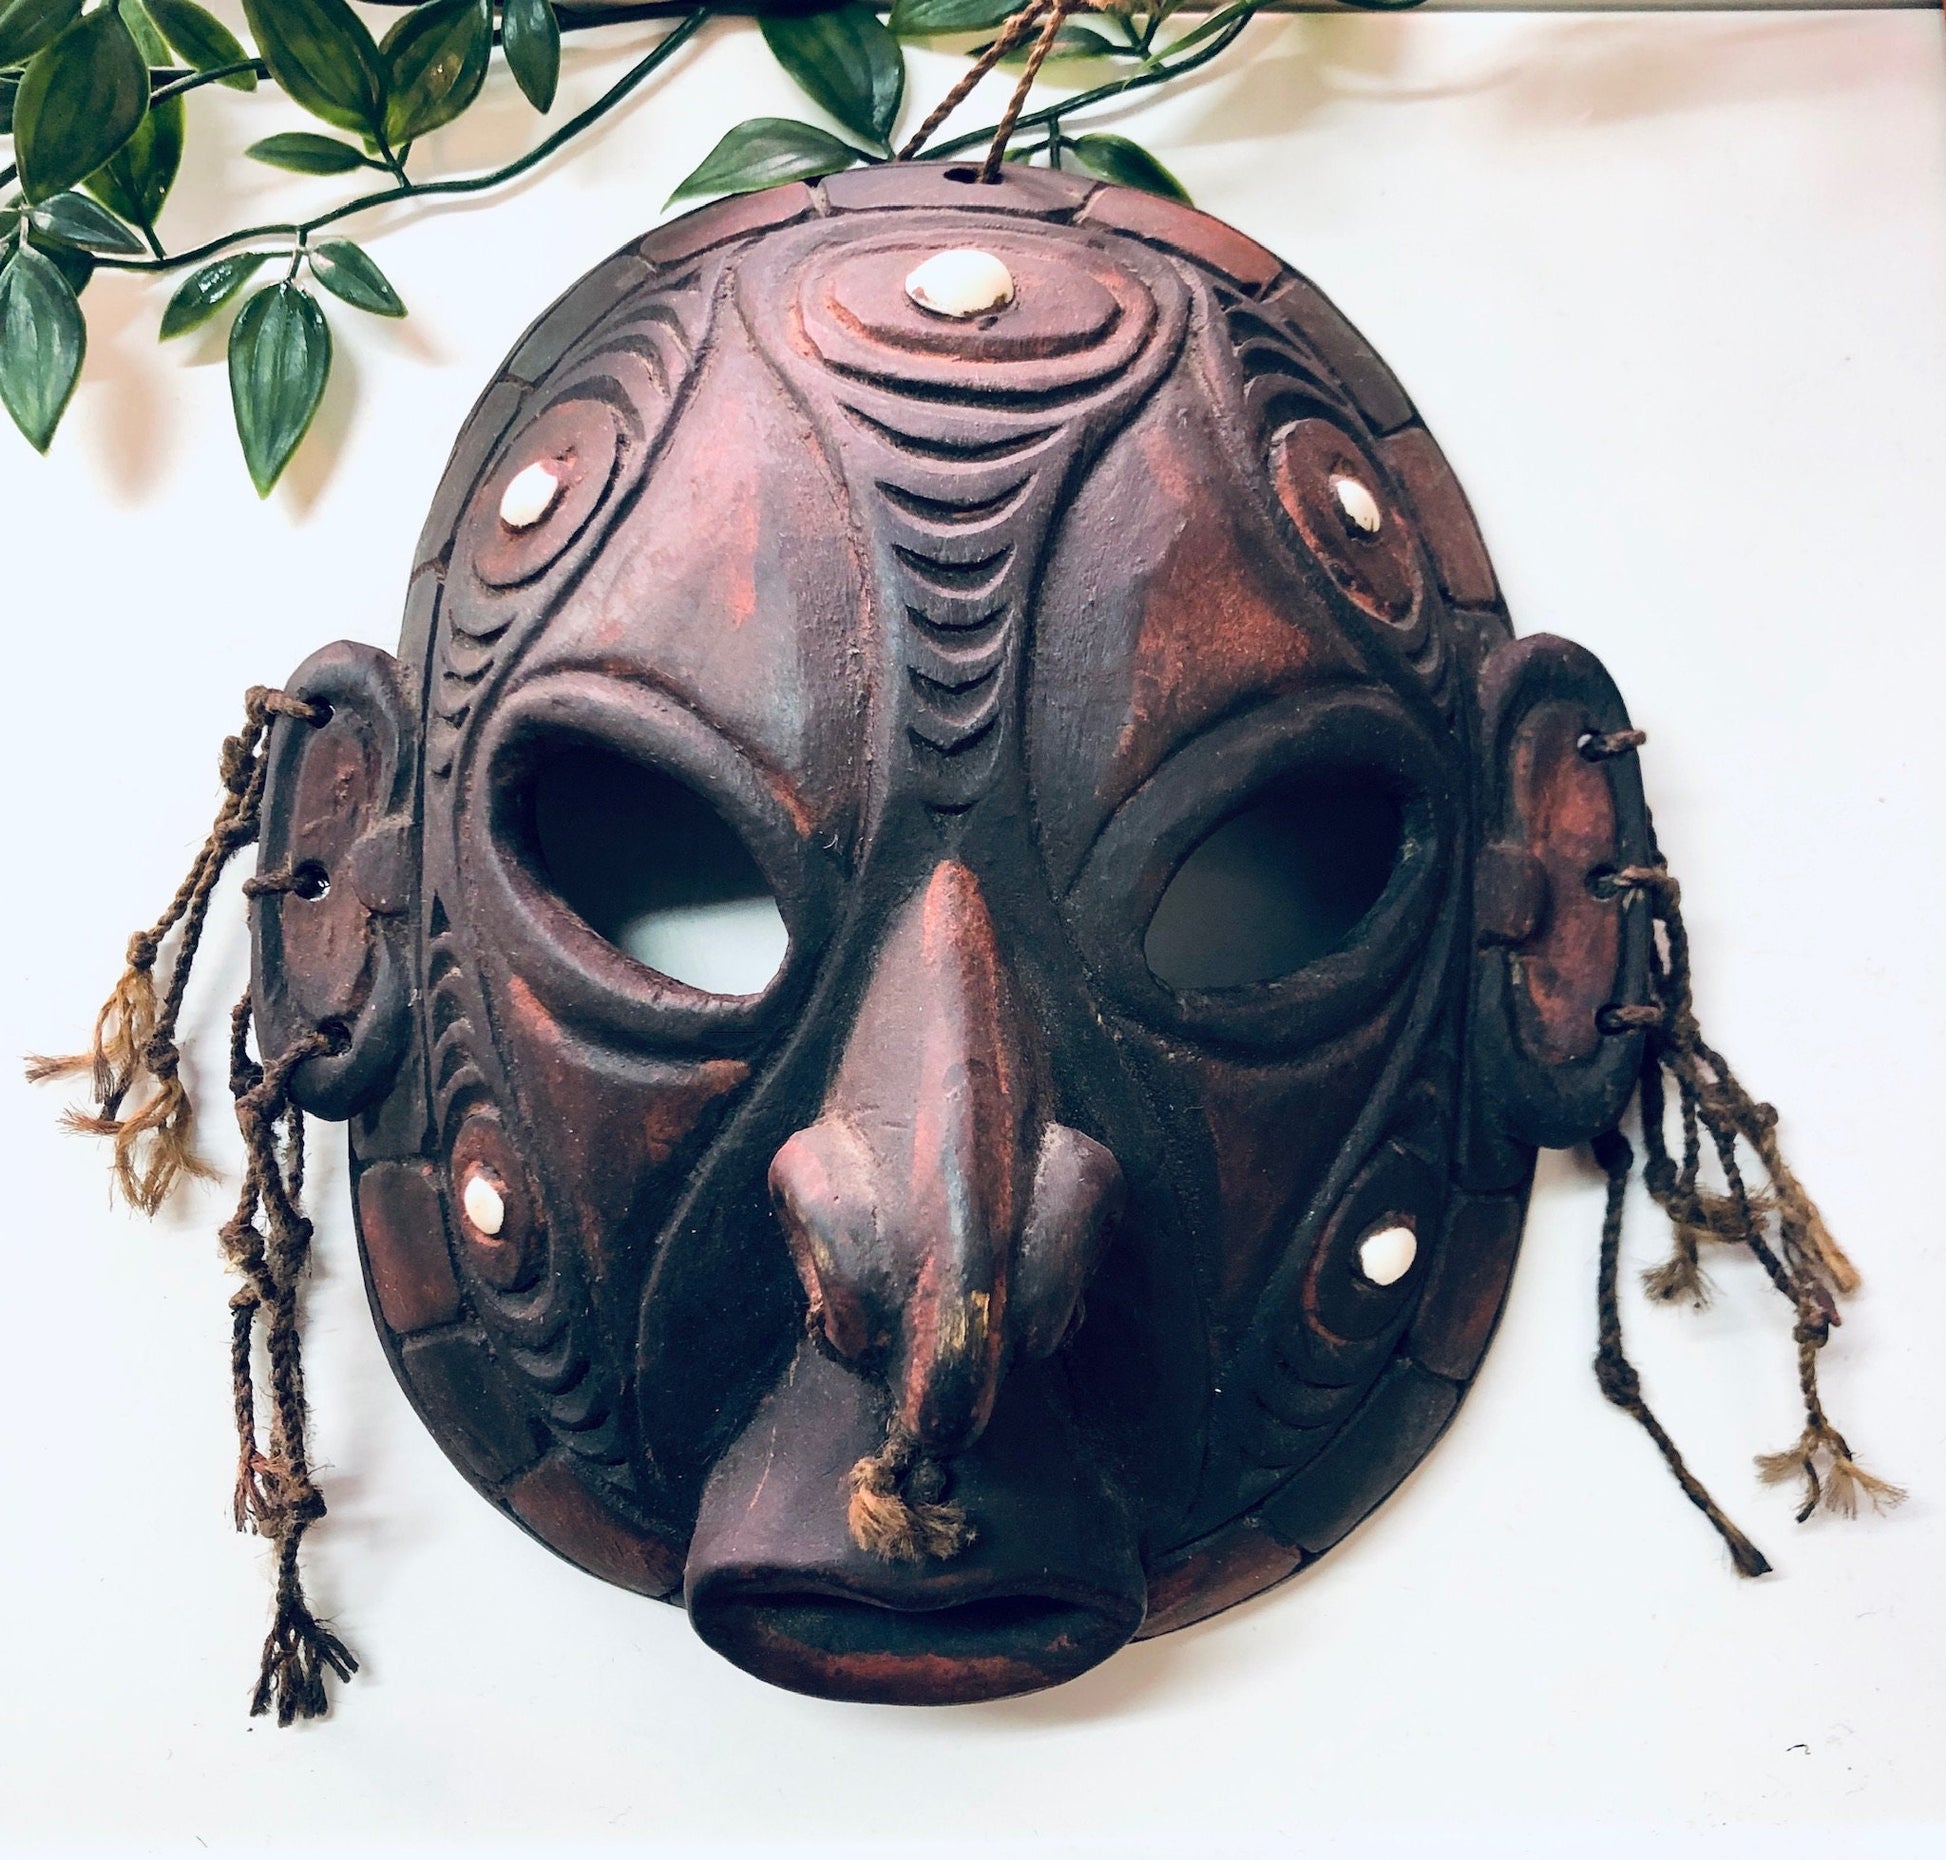 Vintage hand-carved wooden mask with cut-out details, dark finish and tribal design. Unique wall hanging home decor and art piece.